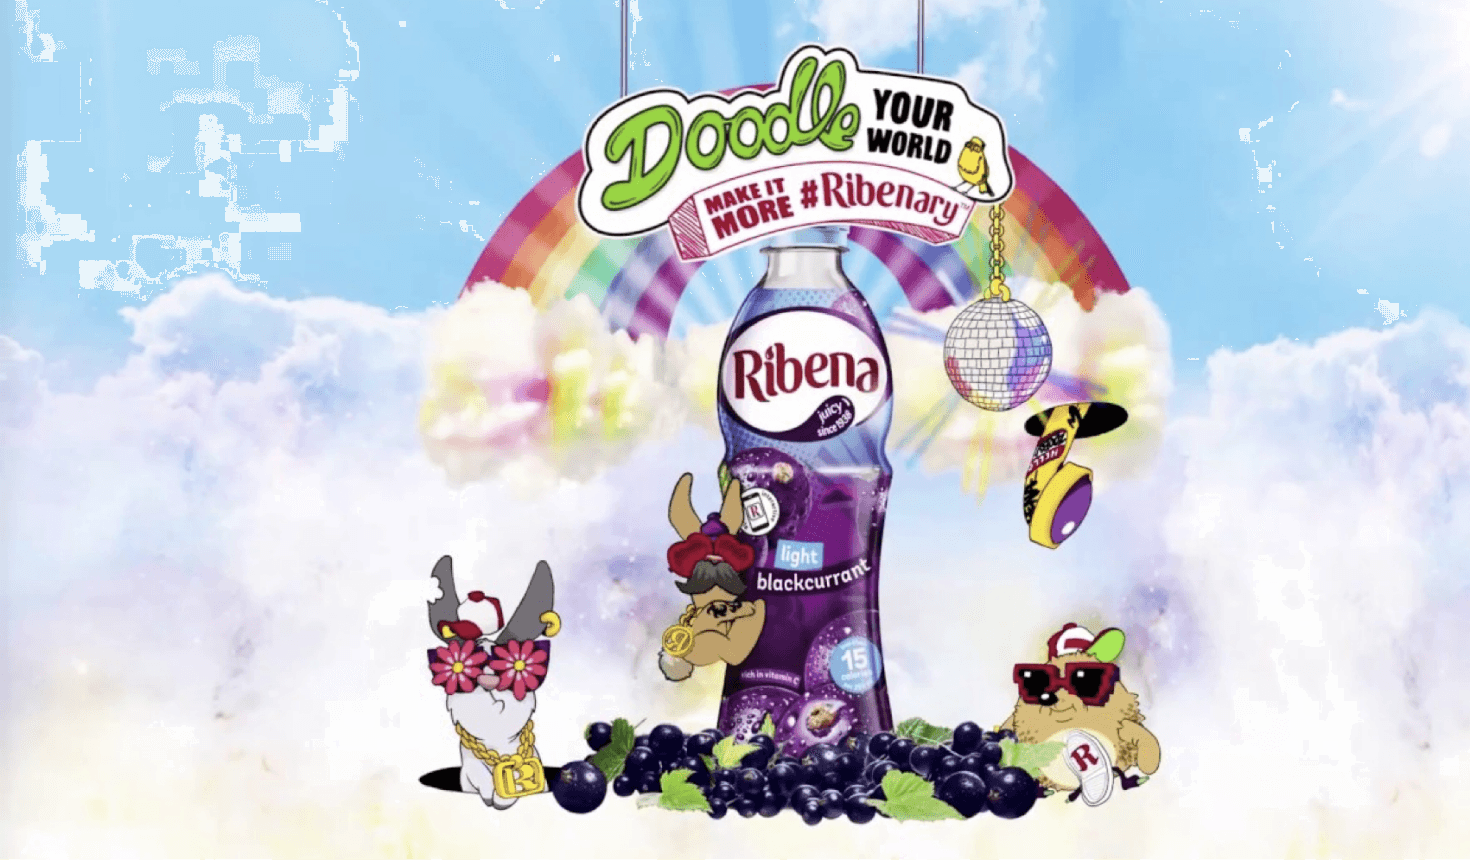 Ribena bottles augmented with AR fun picture